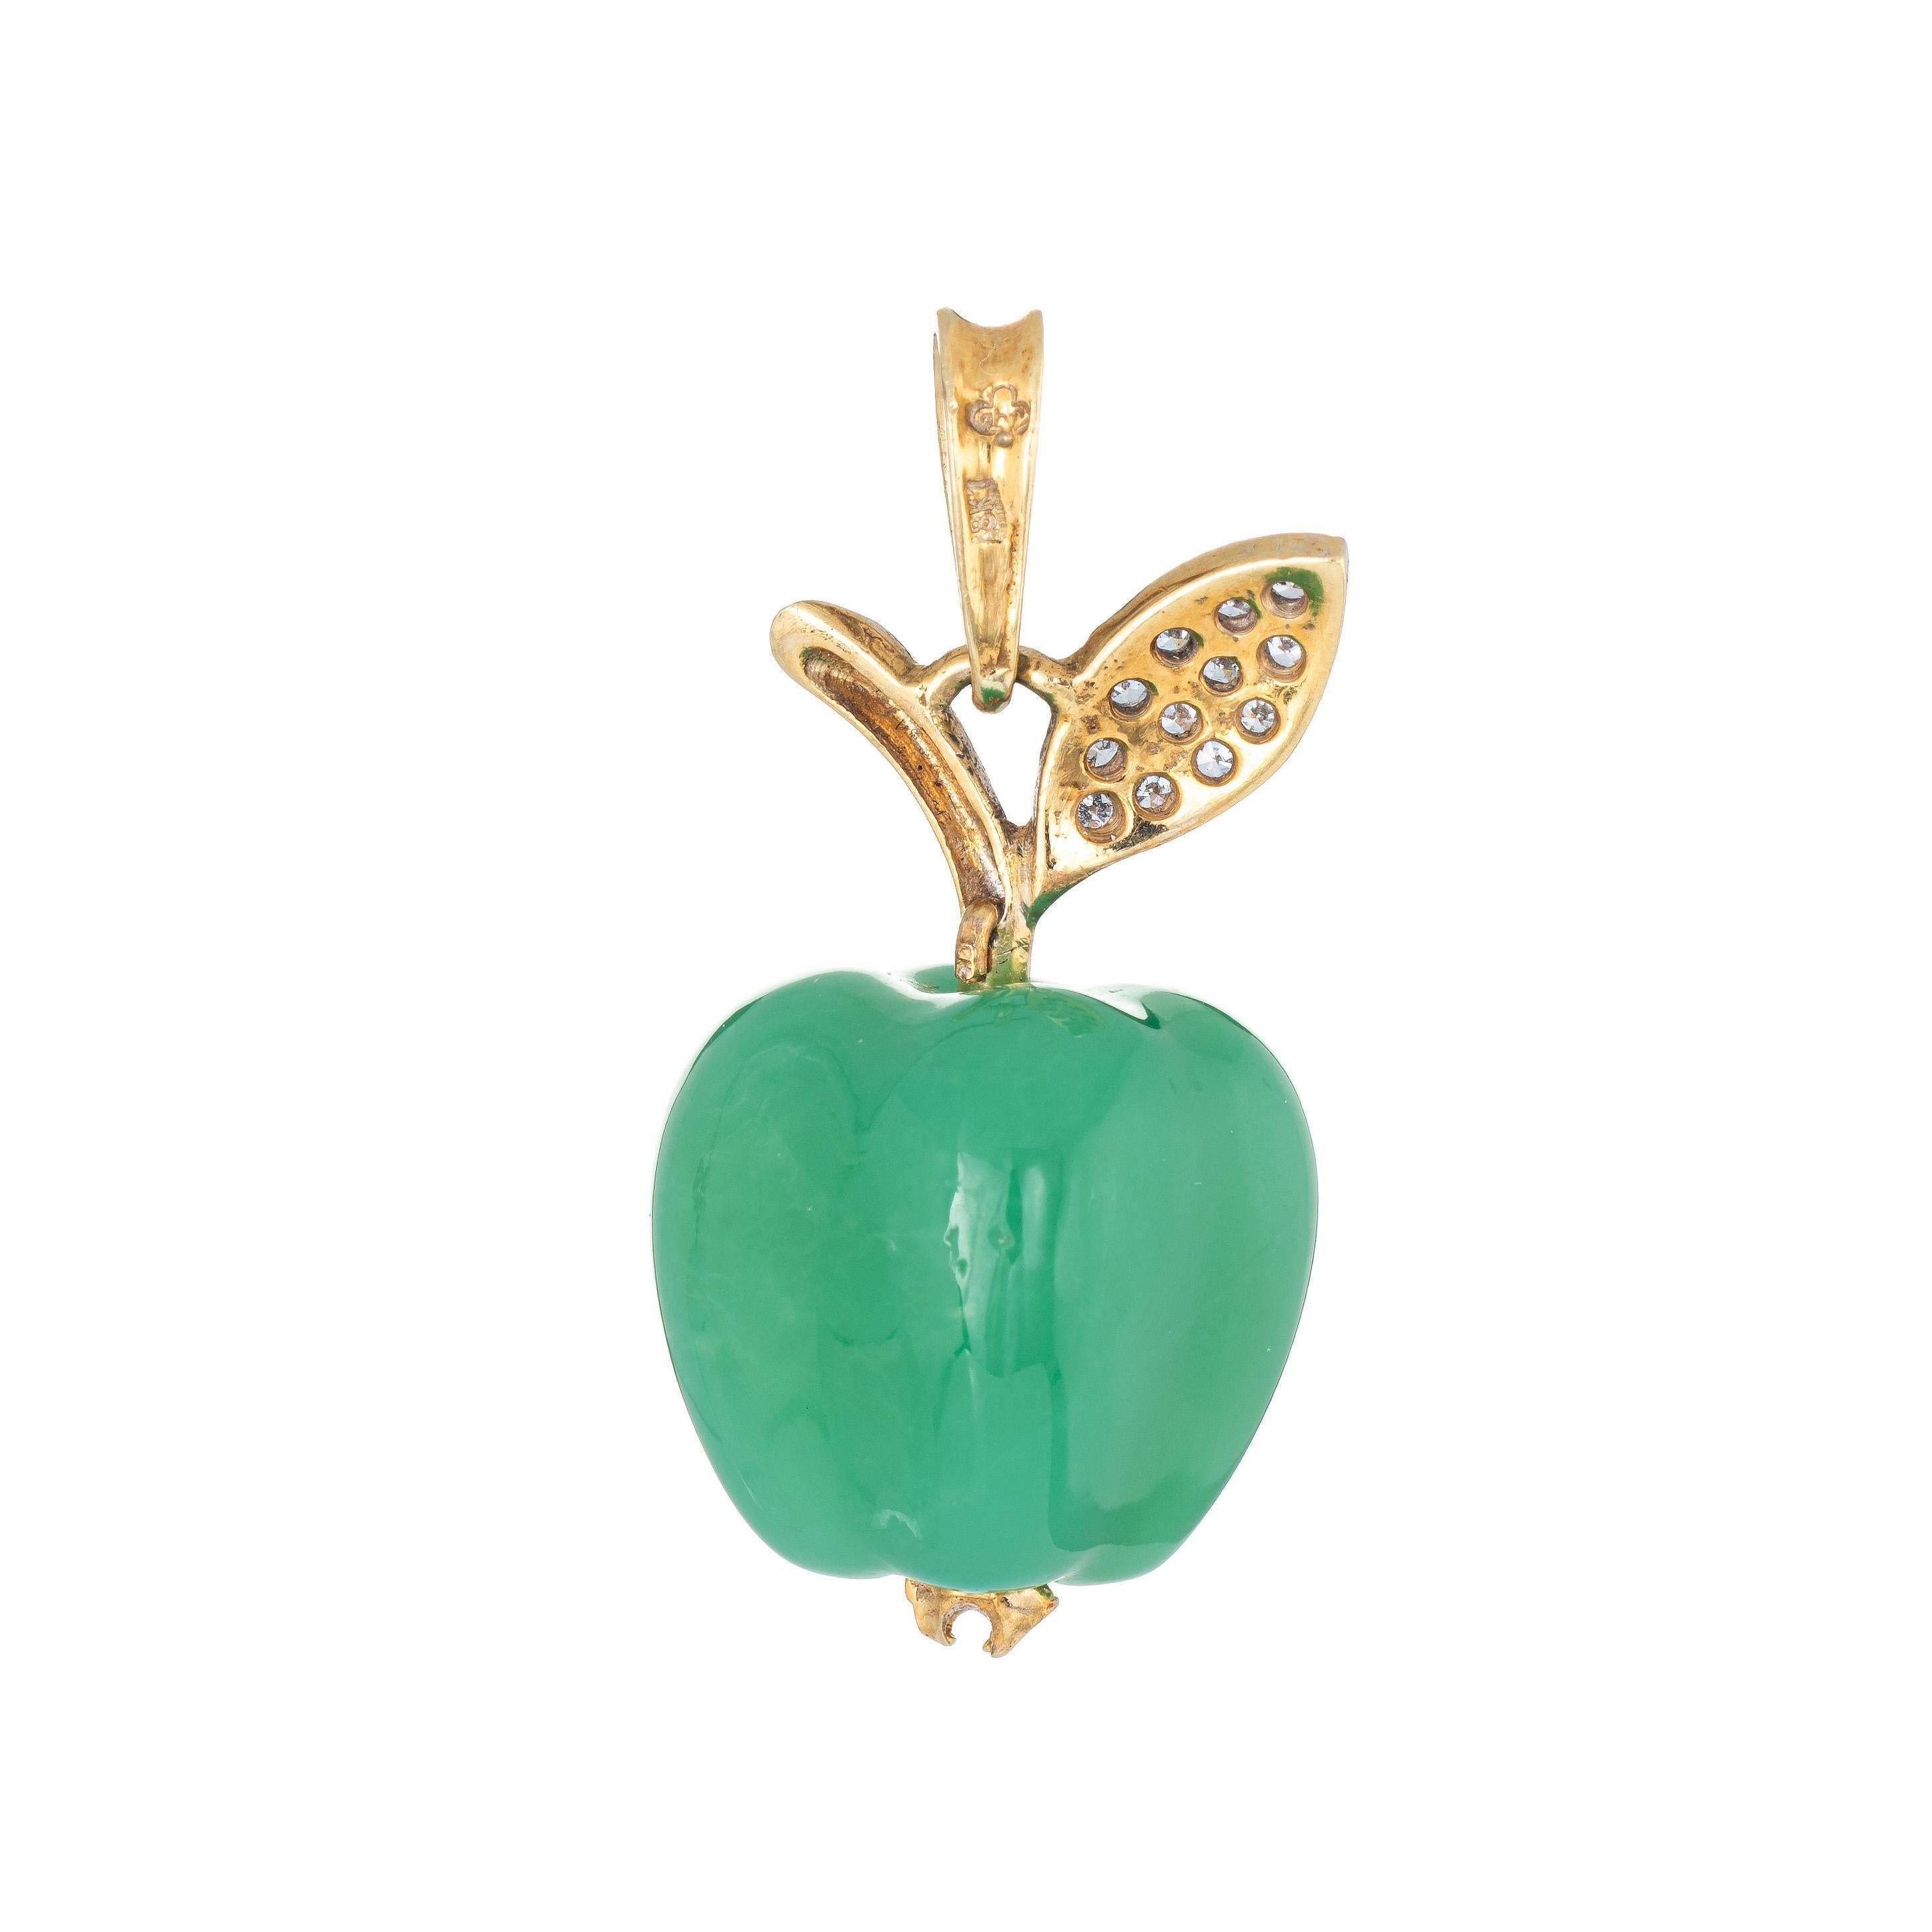 Finely detailed chrysoprase & diamond apple pendant crafted in 18k yellow gold.  

The chrysoprase apple measures 16mm x 15mm. The diamonds total an estimated 0.12 carats (estimated at H-I color and SI2-I1 clarity).  

The charming apple pendant can